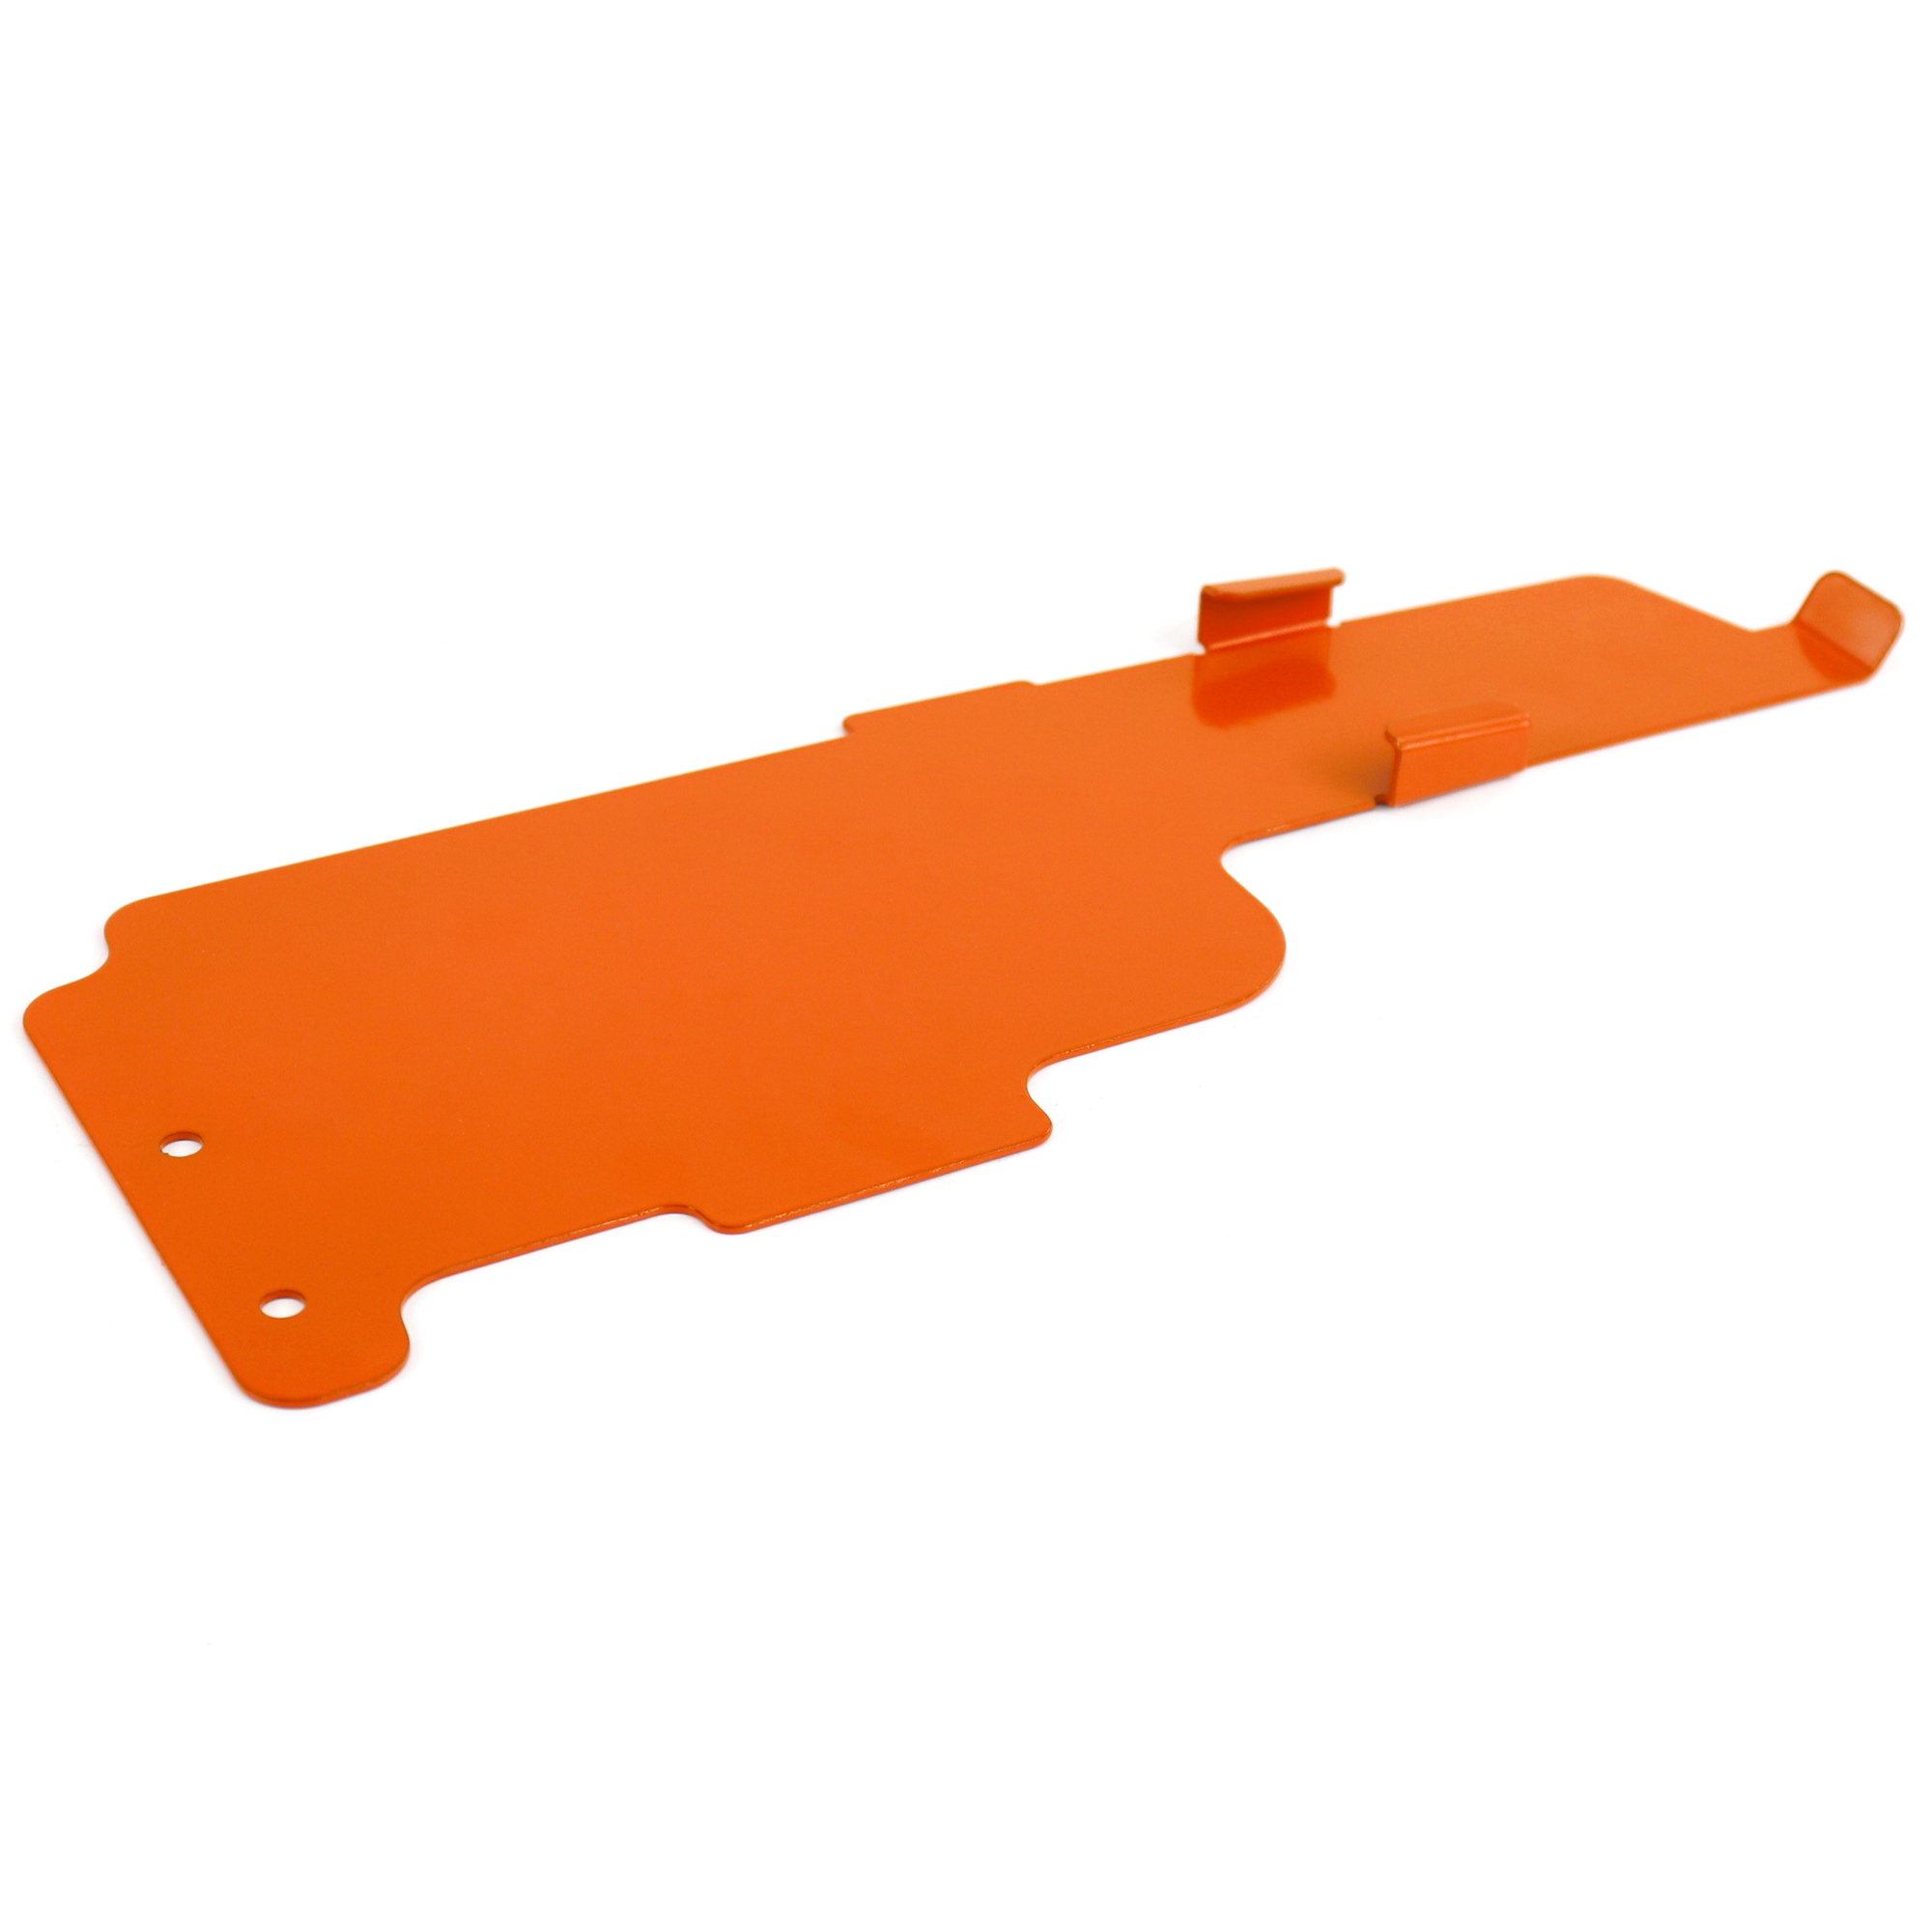 HANDLE PROTECTION PLATE GUARD FOR STIHL CHAINSAW 017 018 MS170 MS180 BOX2766 